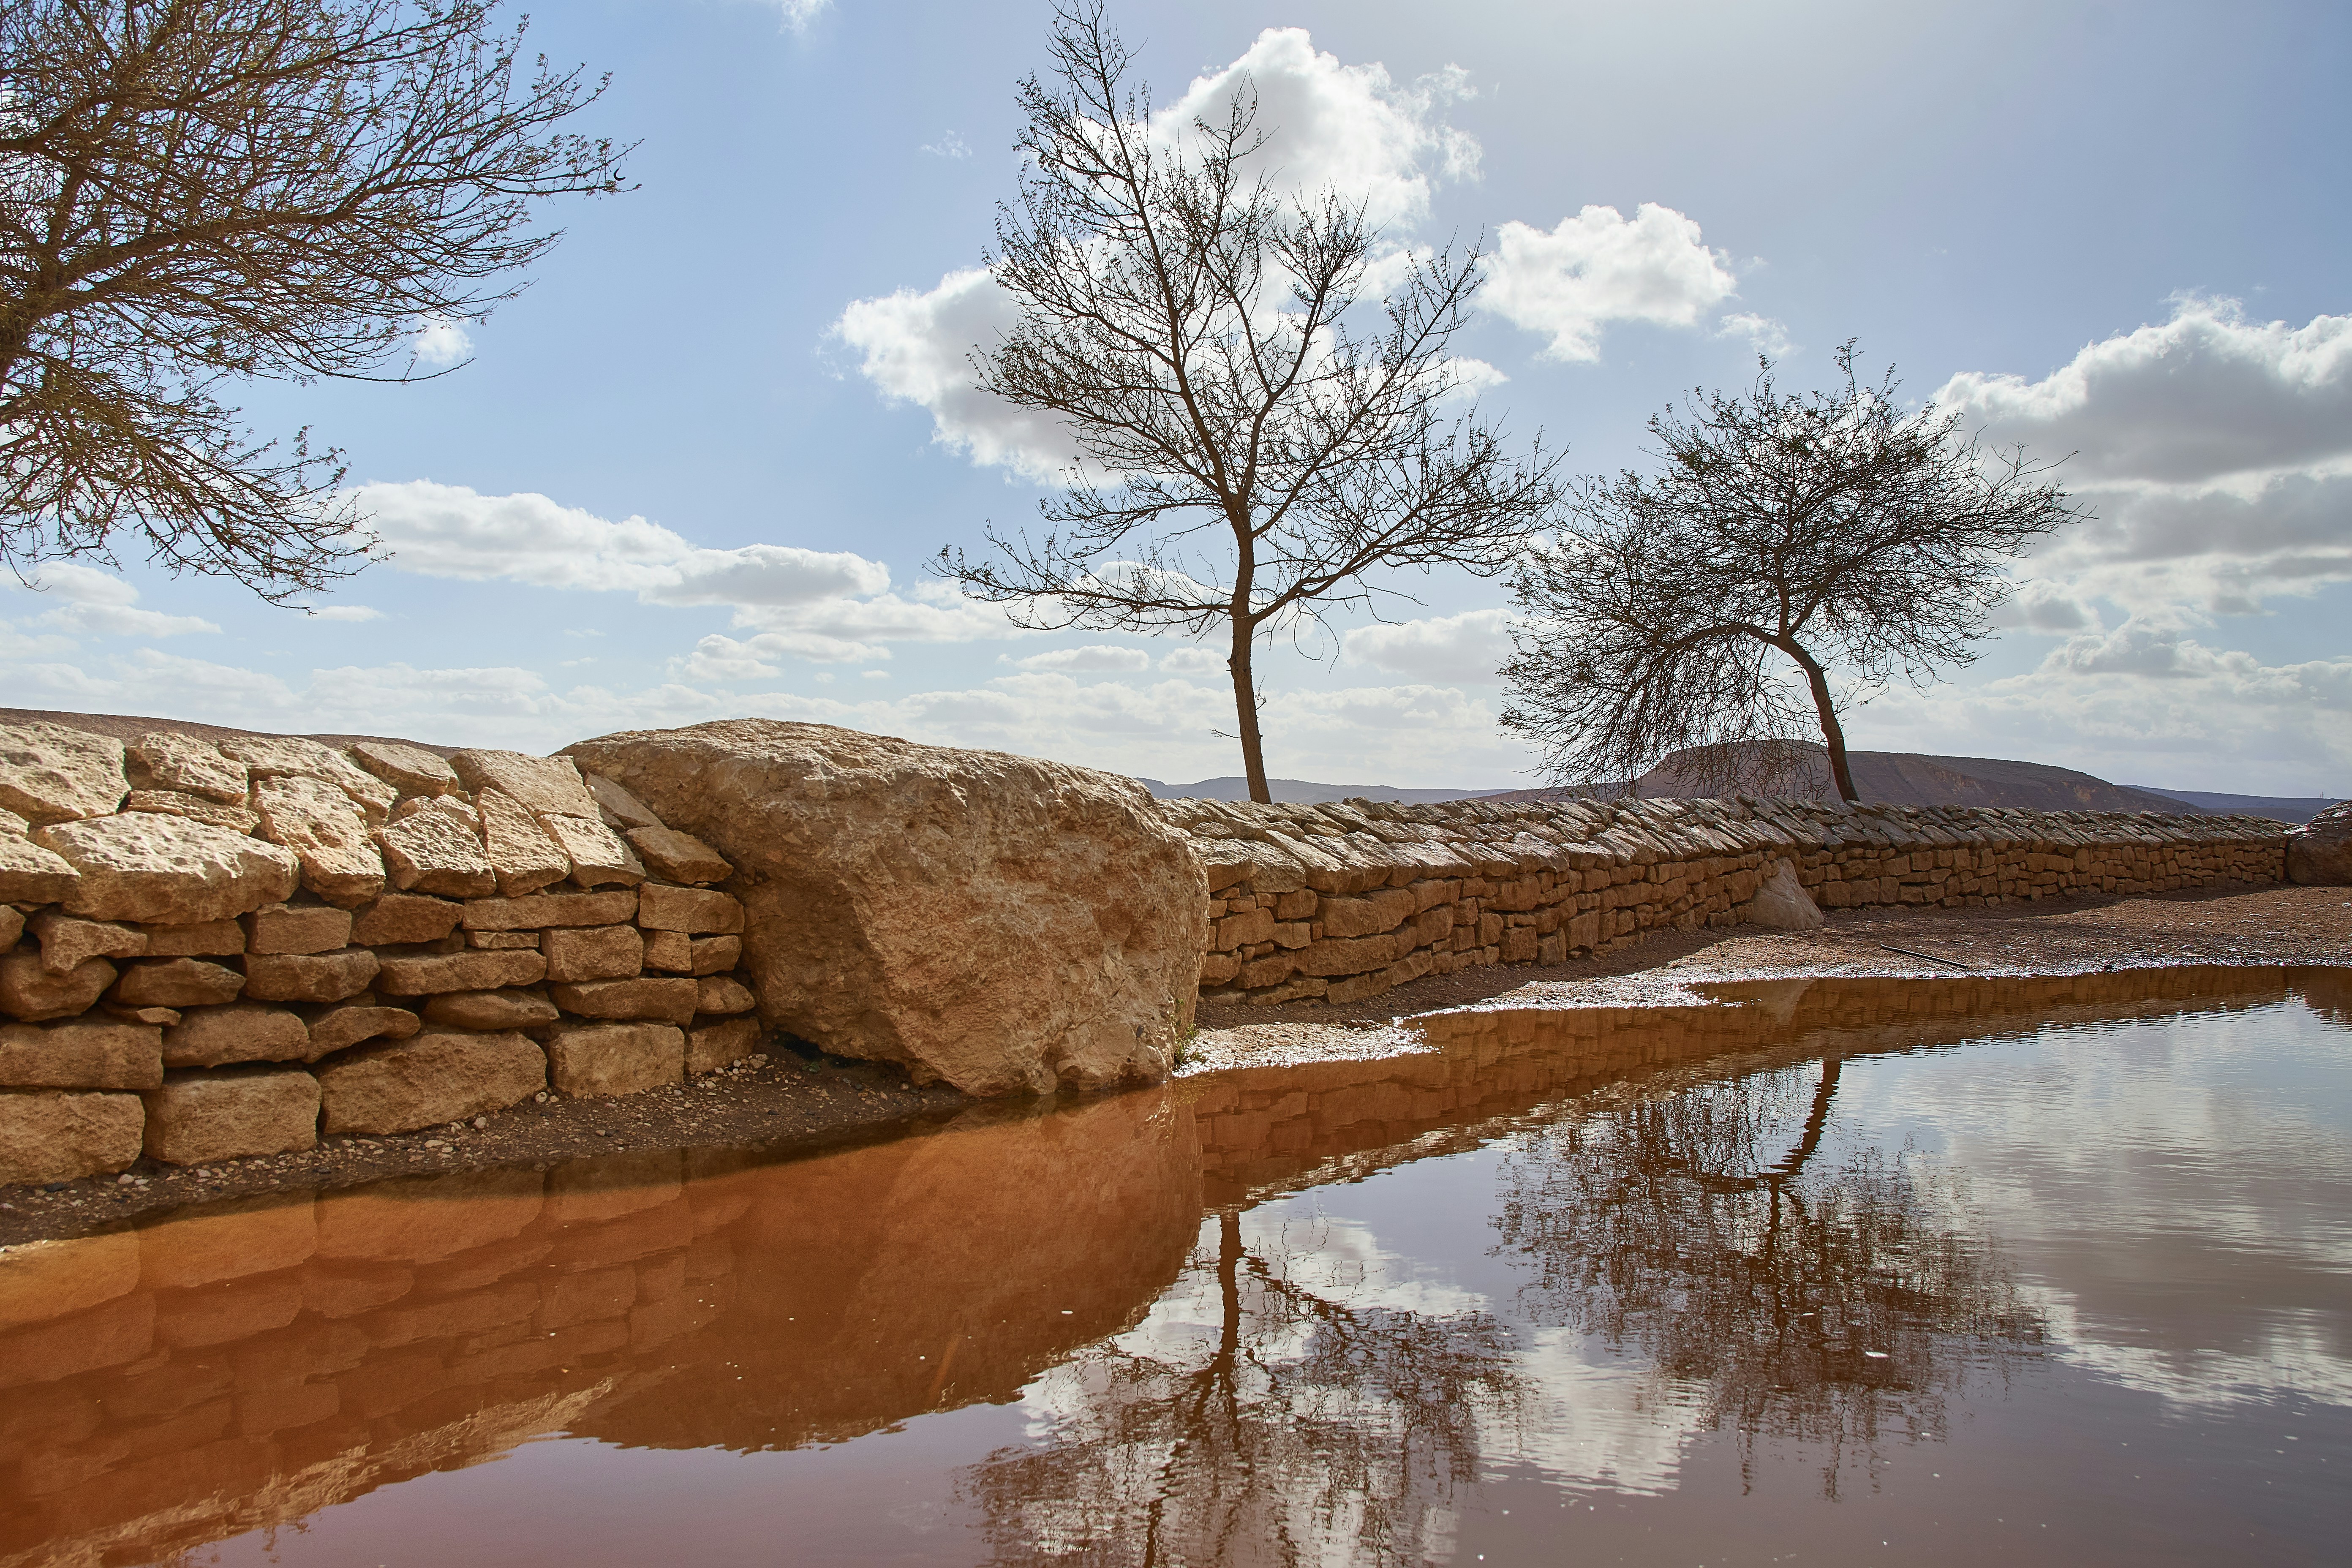 A fence made of stones with three bare trees on one side and a puddle reflecting the trees on the other side